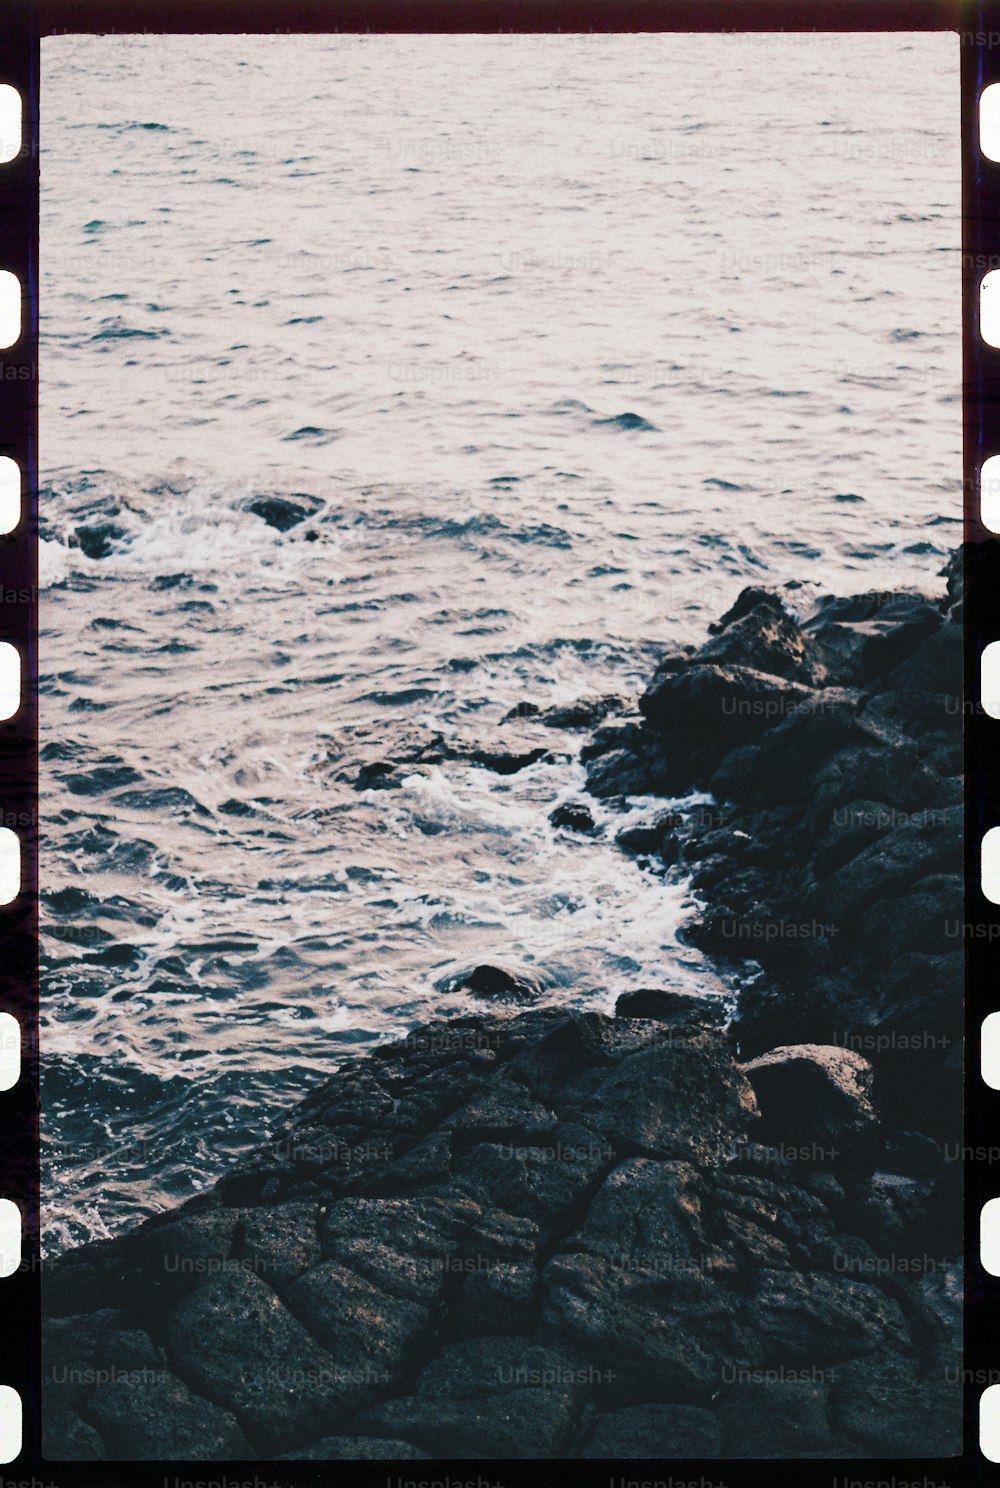 a polaroid photo of the ocean and rocks